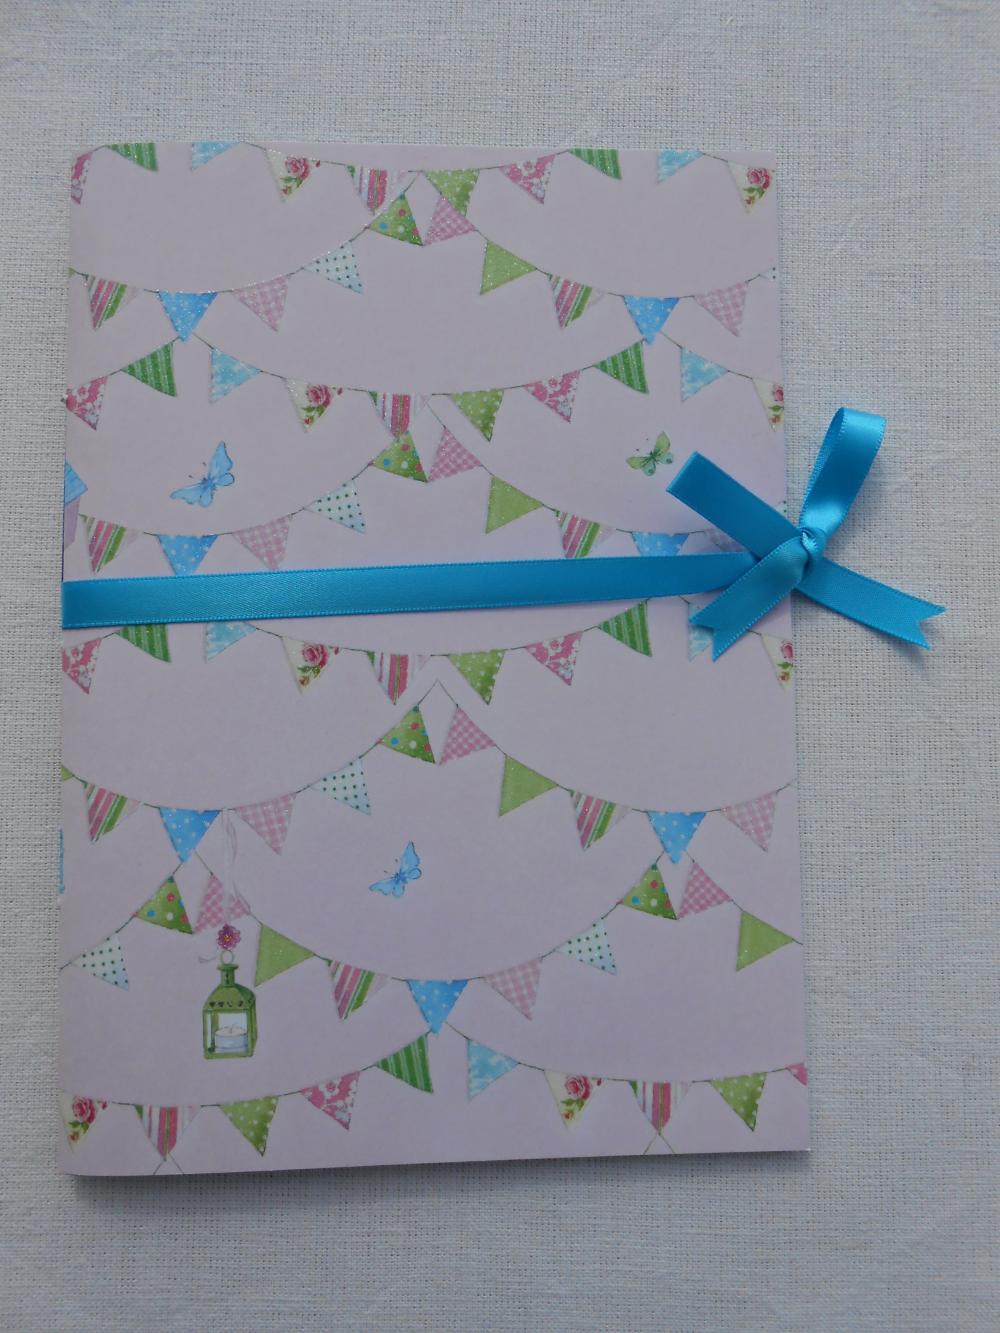 A5 Handstitched Notebook Bunting Butterflies Birdhouses Pink Cover With Turquoise Ribbon